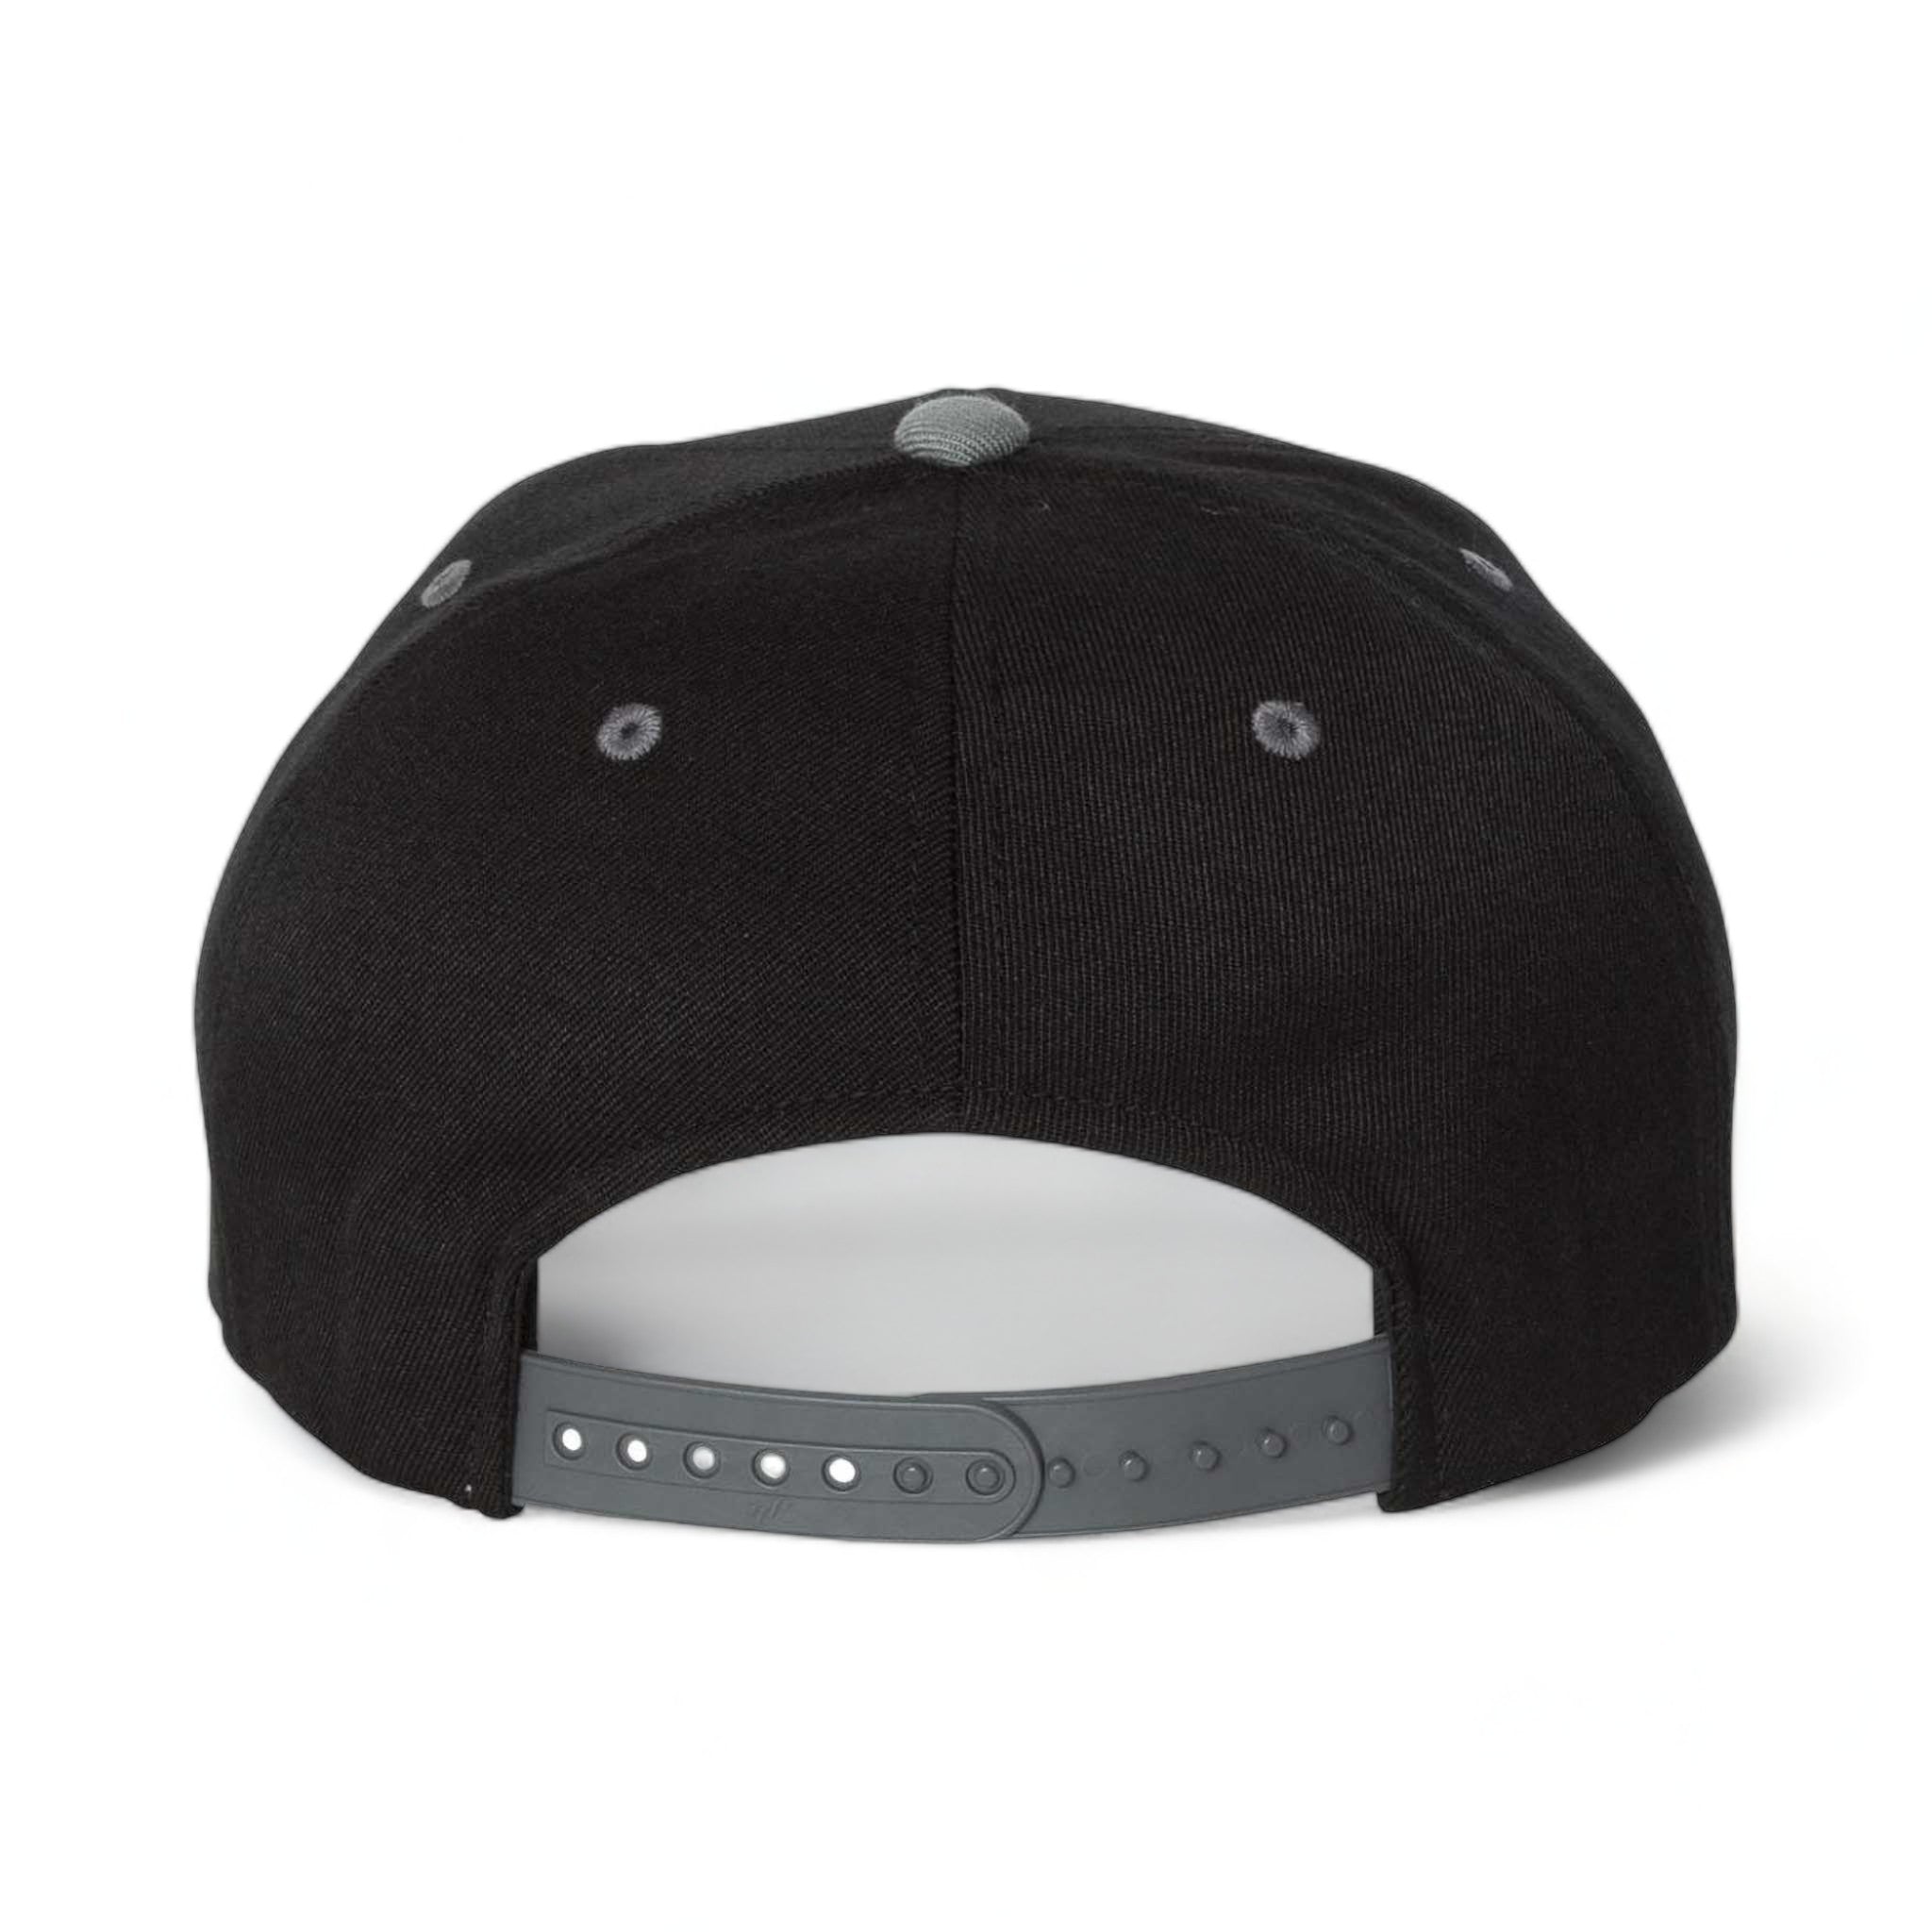 Back view of Flexfit 110F custom hat in black and grey